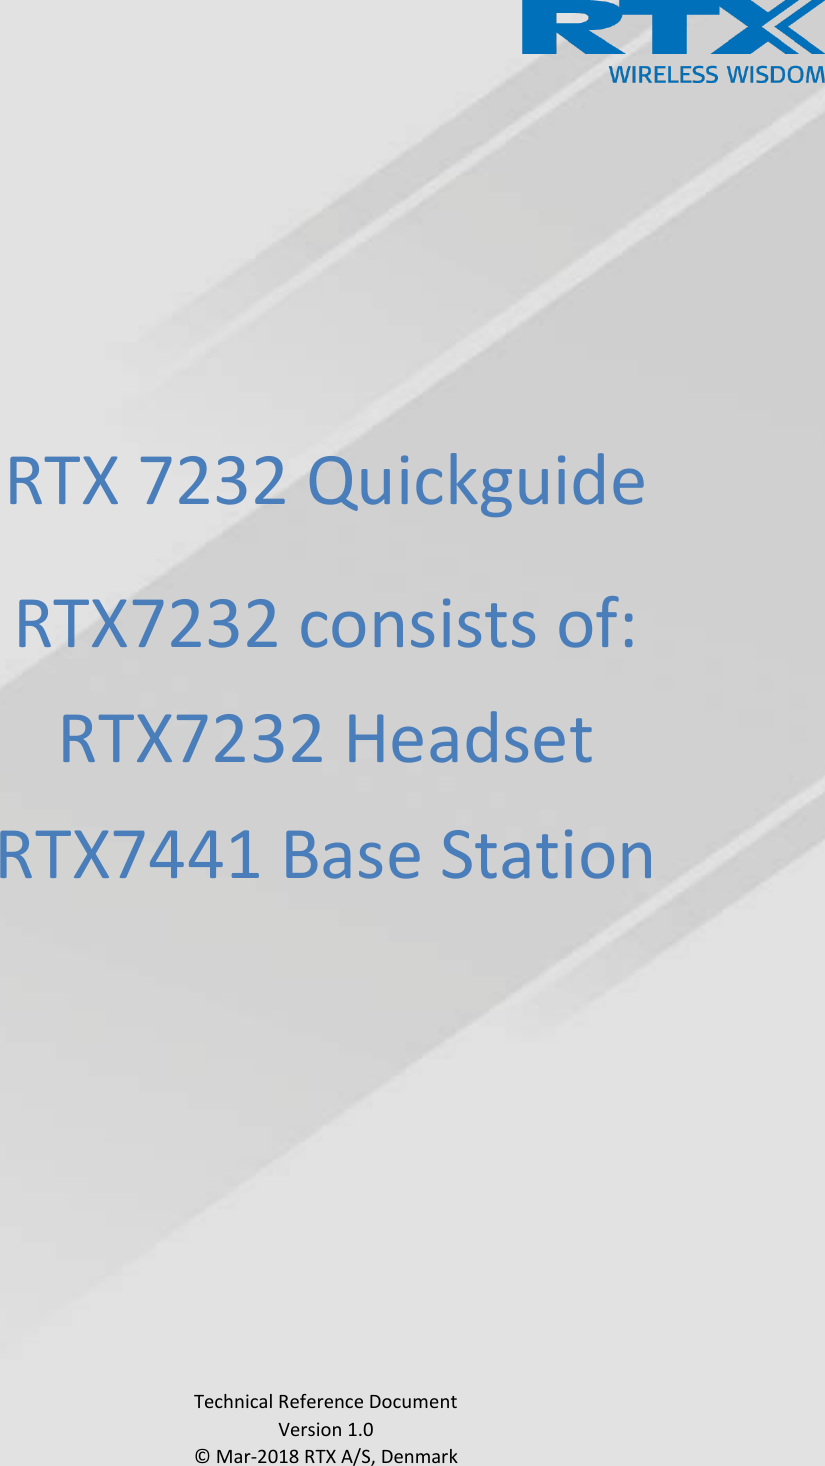      RTX 7232 Quickguide  RTX7232 consists of: RTX7232 Headset RTX7441 Base Station                  Technical Reference Document Version 1.0 © Mar-2018 RTX A/S, Denmark 